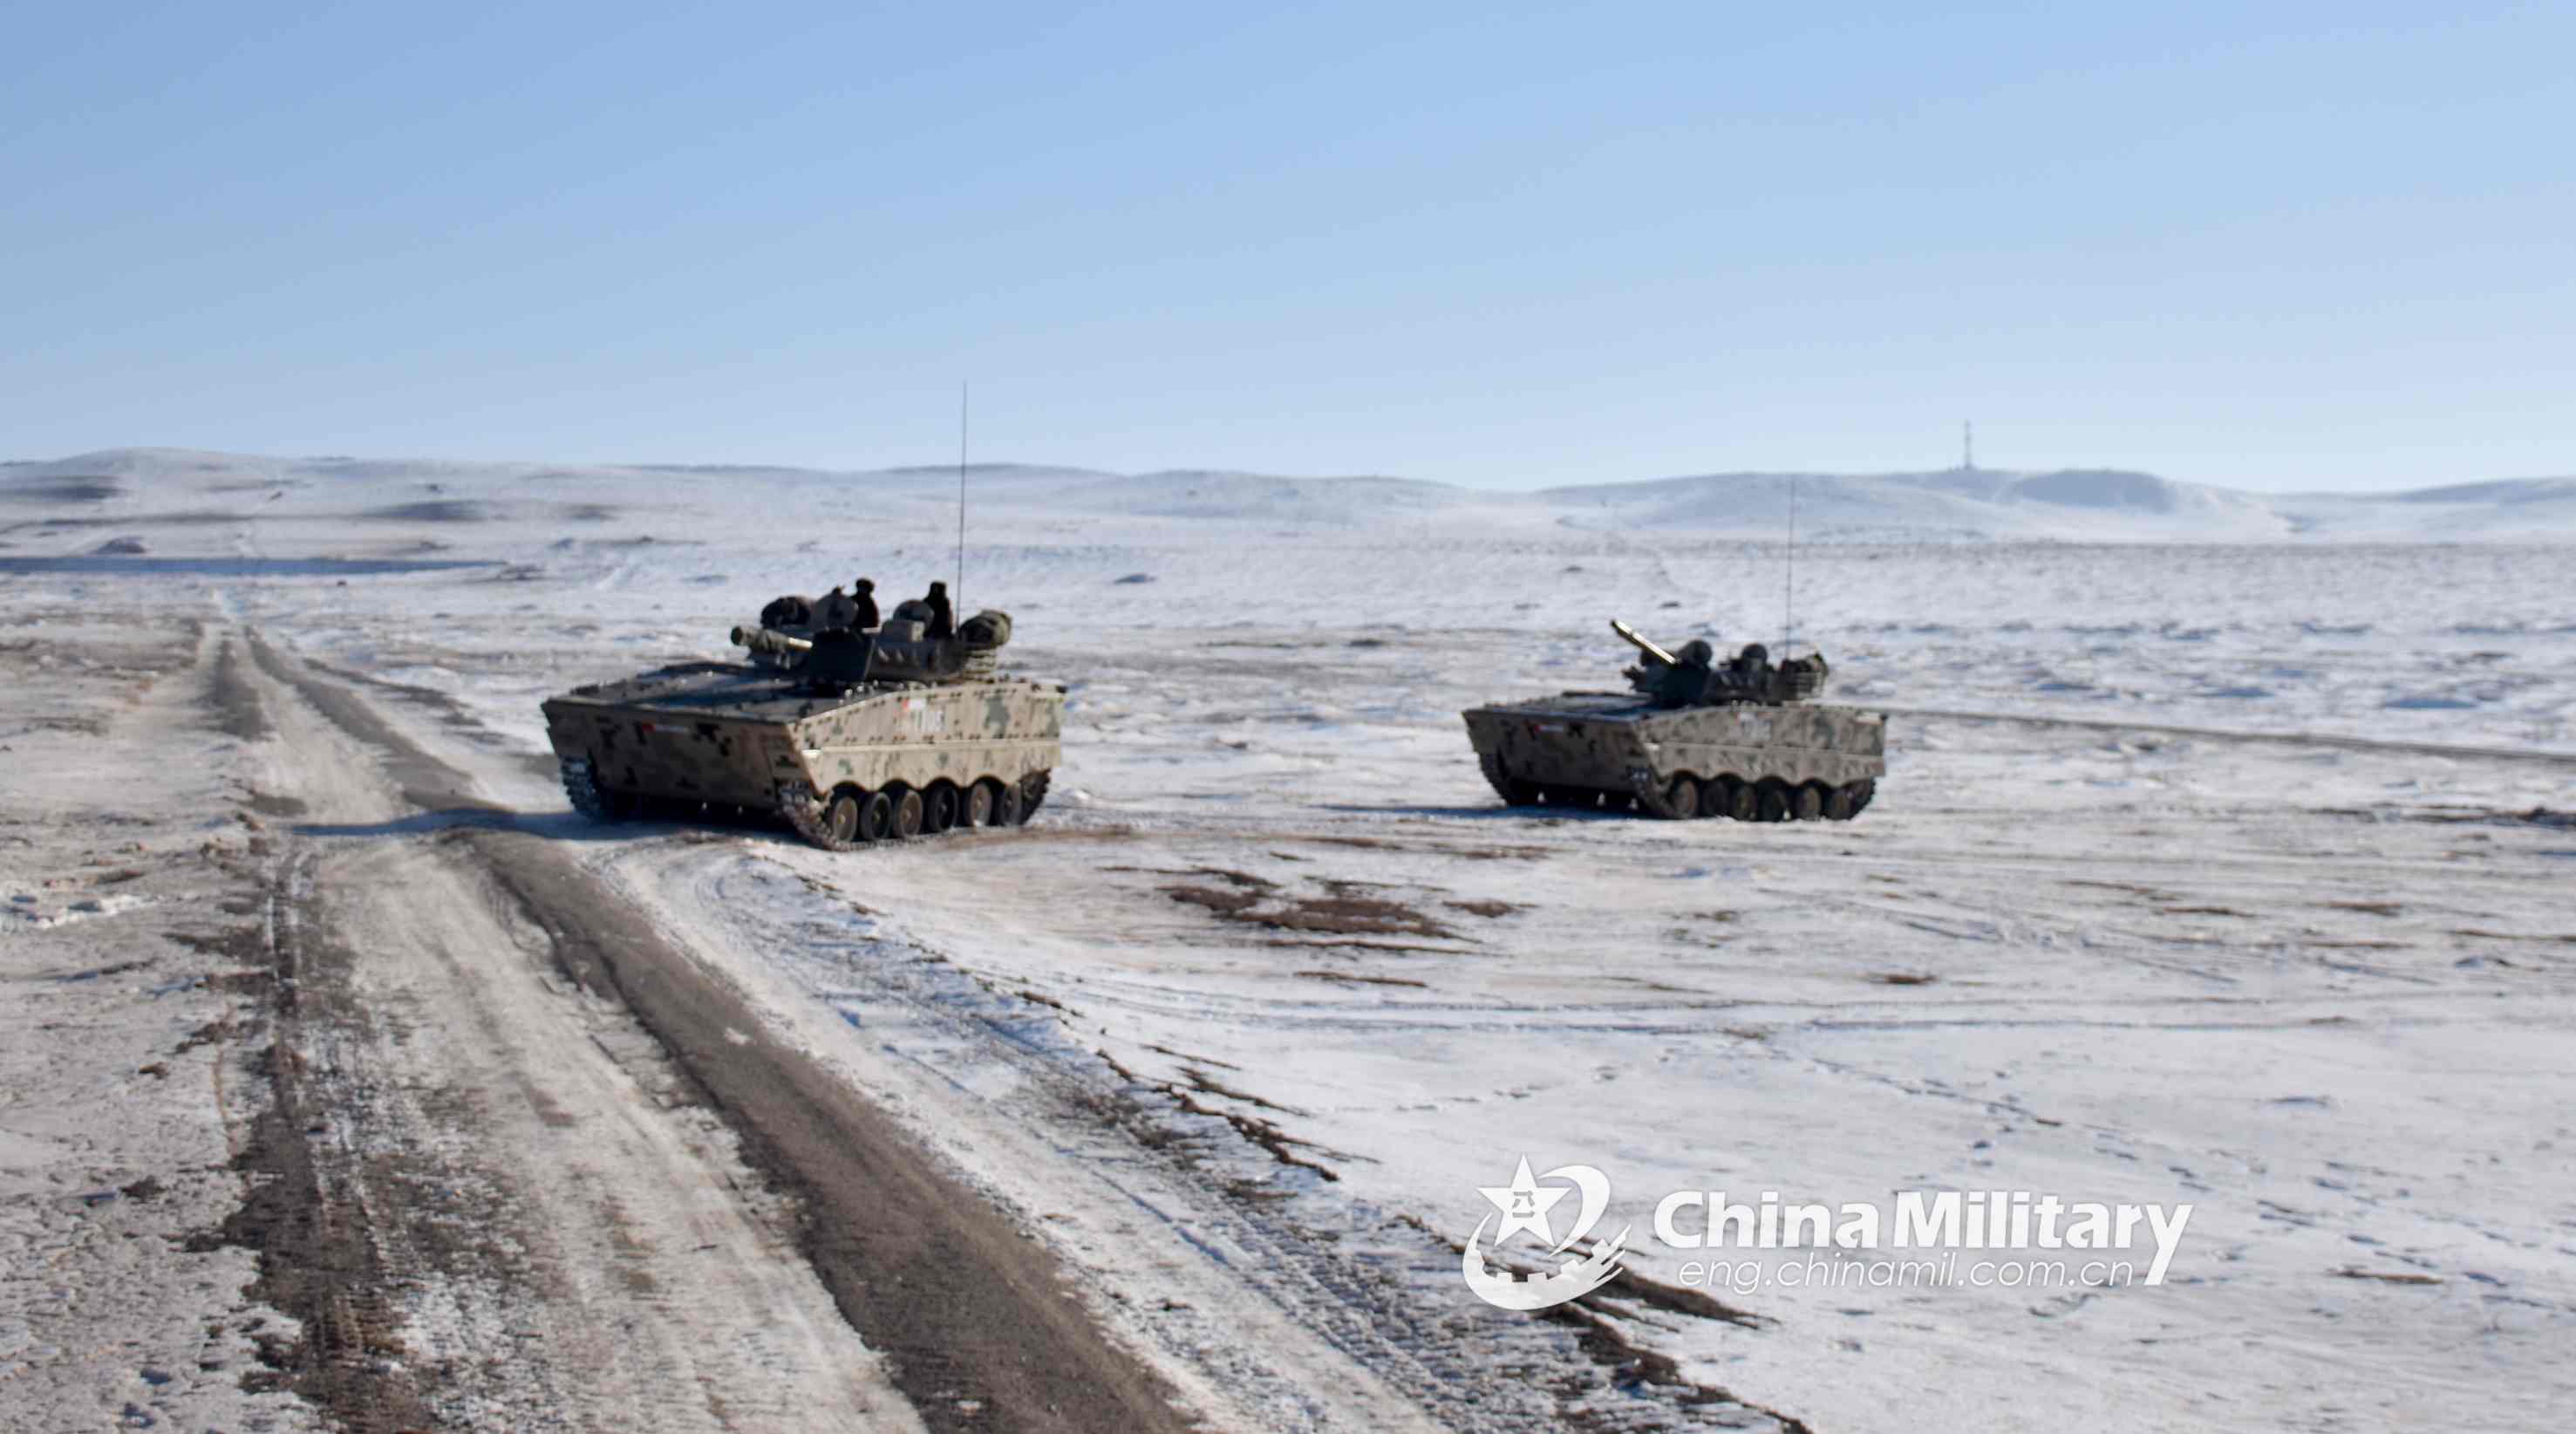 Soldiers assigned to a brigade under the PLA 81st Group Army drive their armored personnel carriers on the snow ground during a driving skills training exercise on December 9, 2020. (eng.chinamil.com.cn/Photo by Peng Fang)